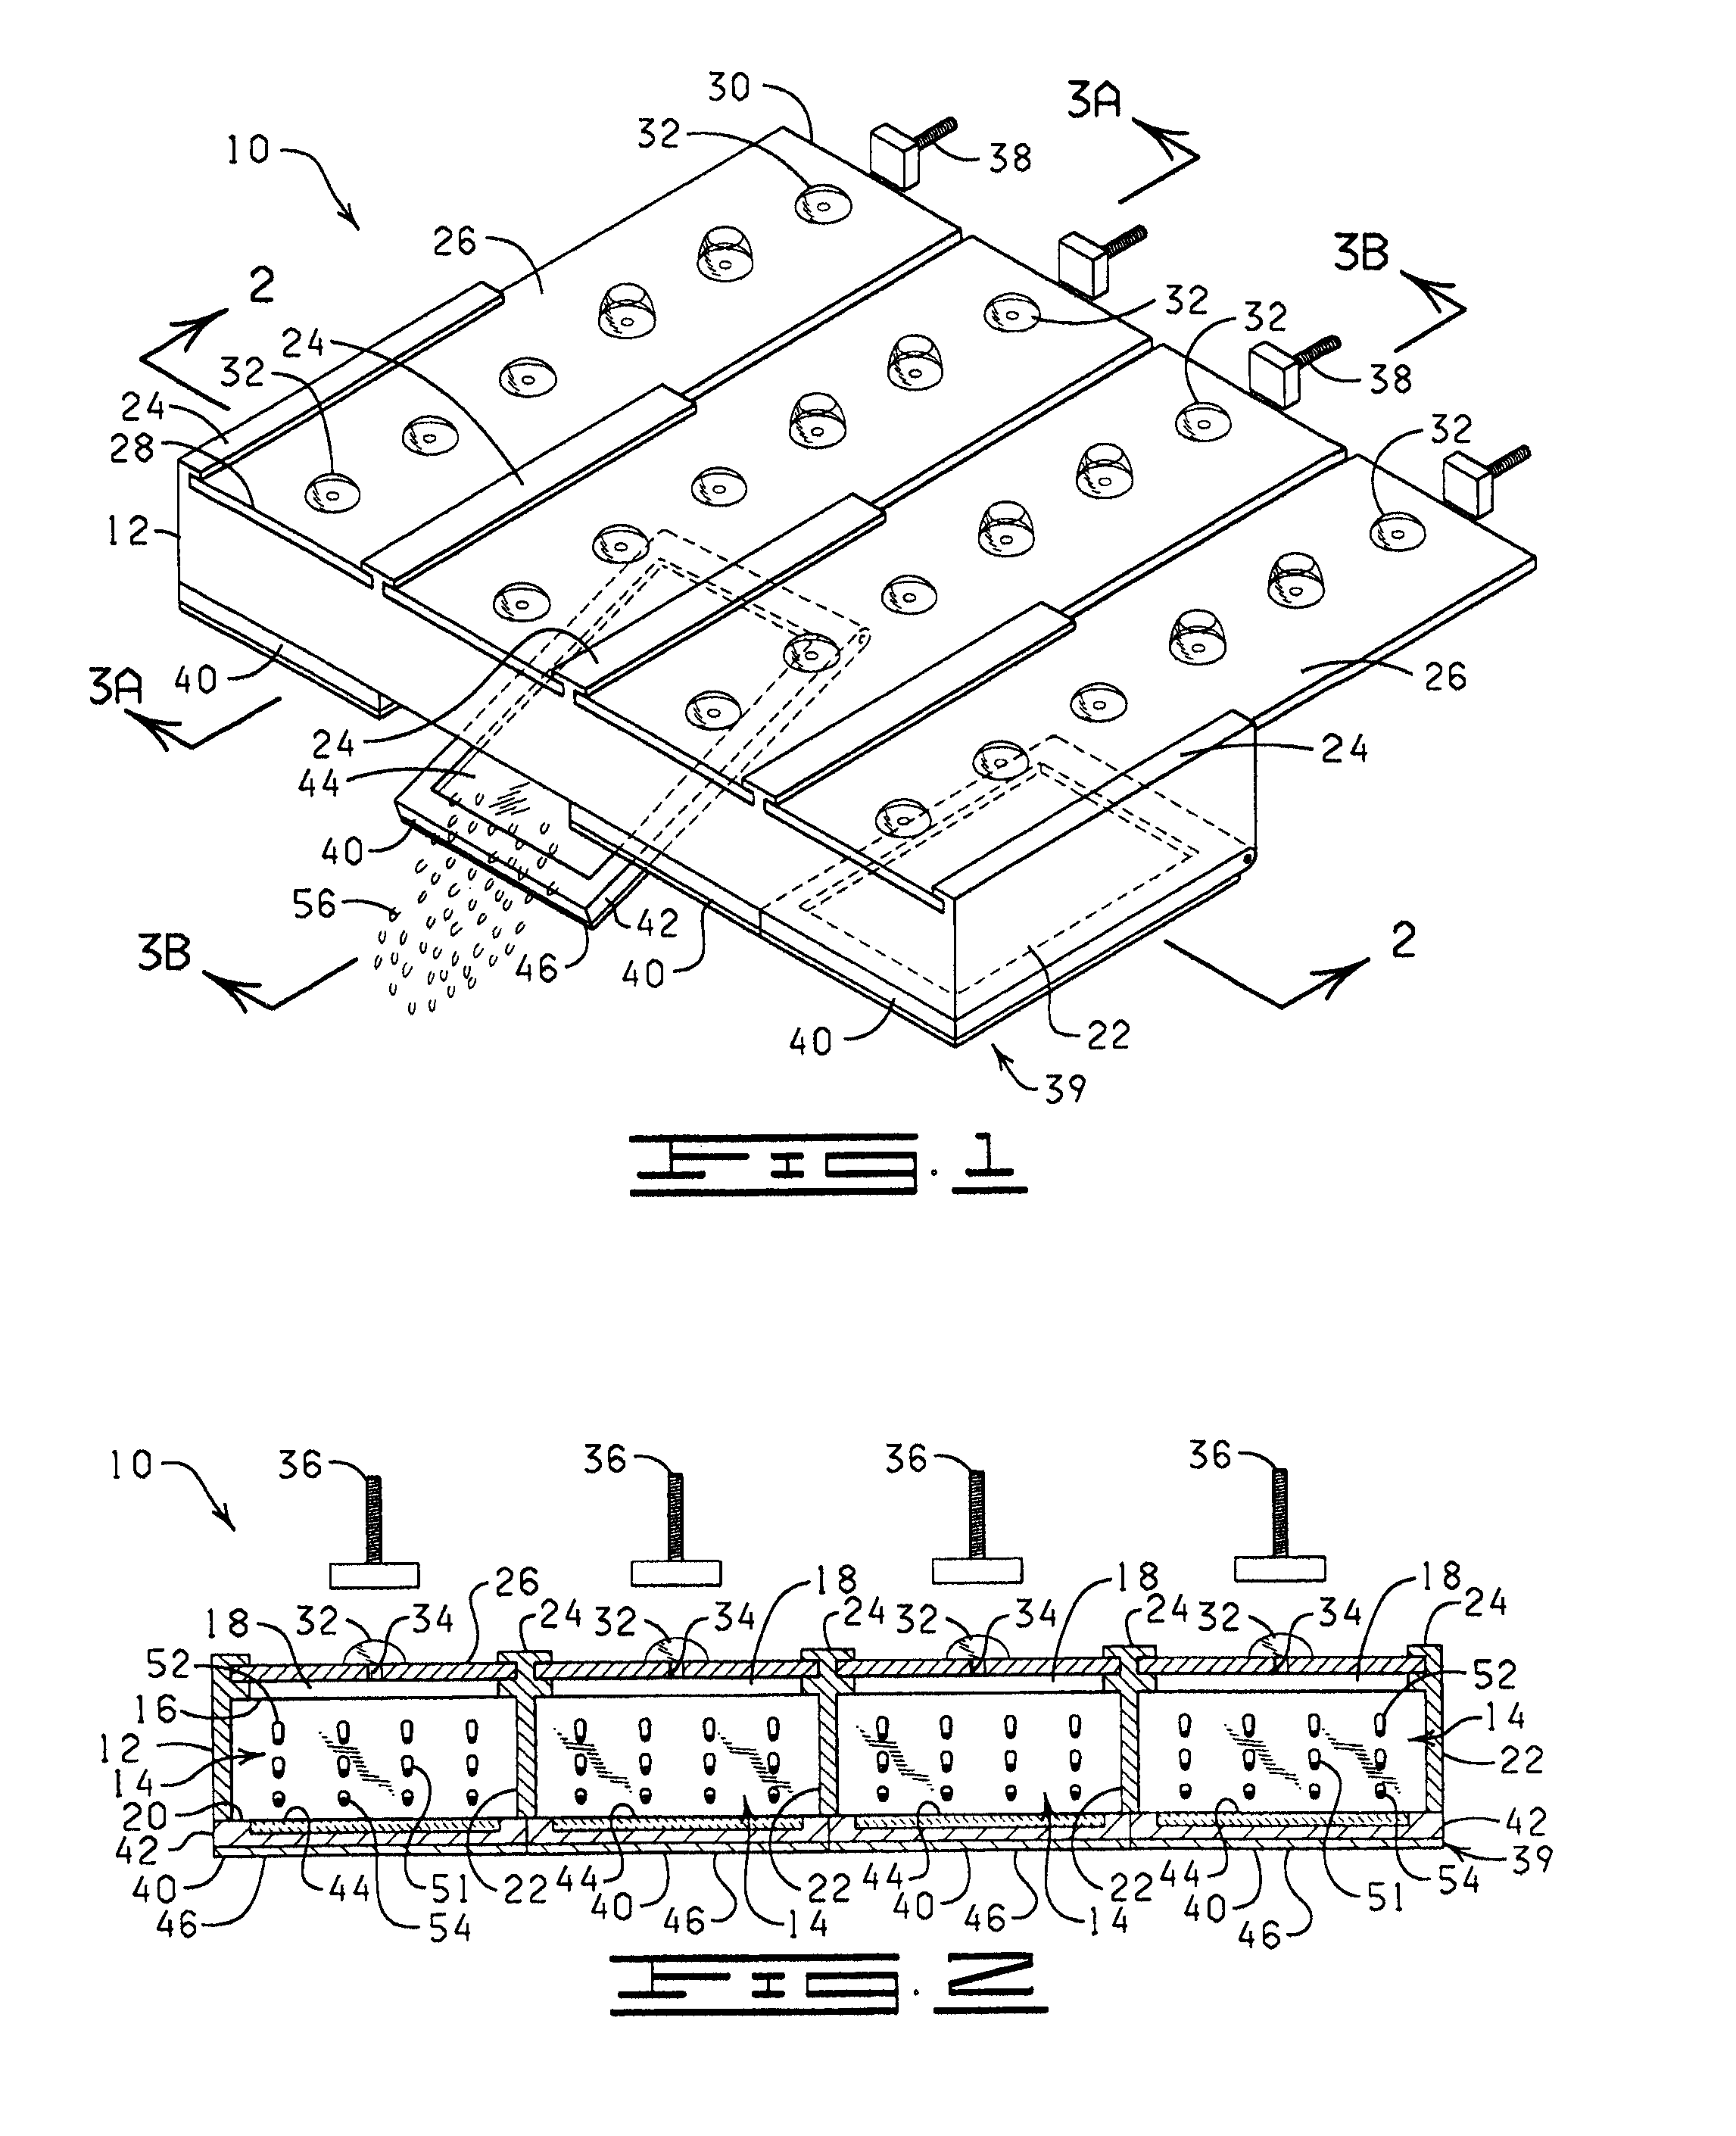 In situ heat induced antigen recovery and staining apparatus and method